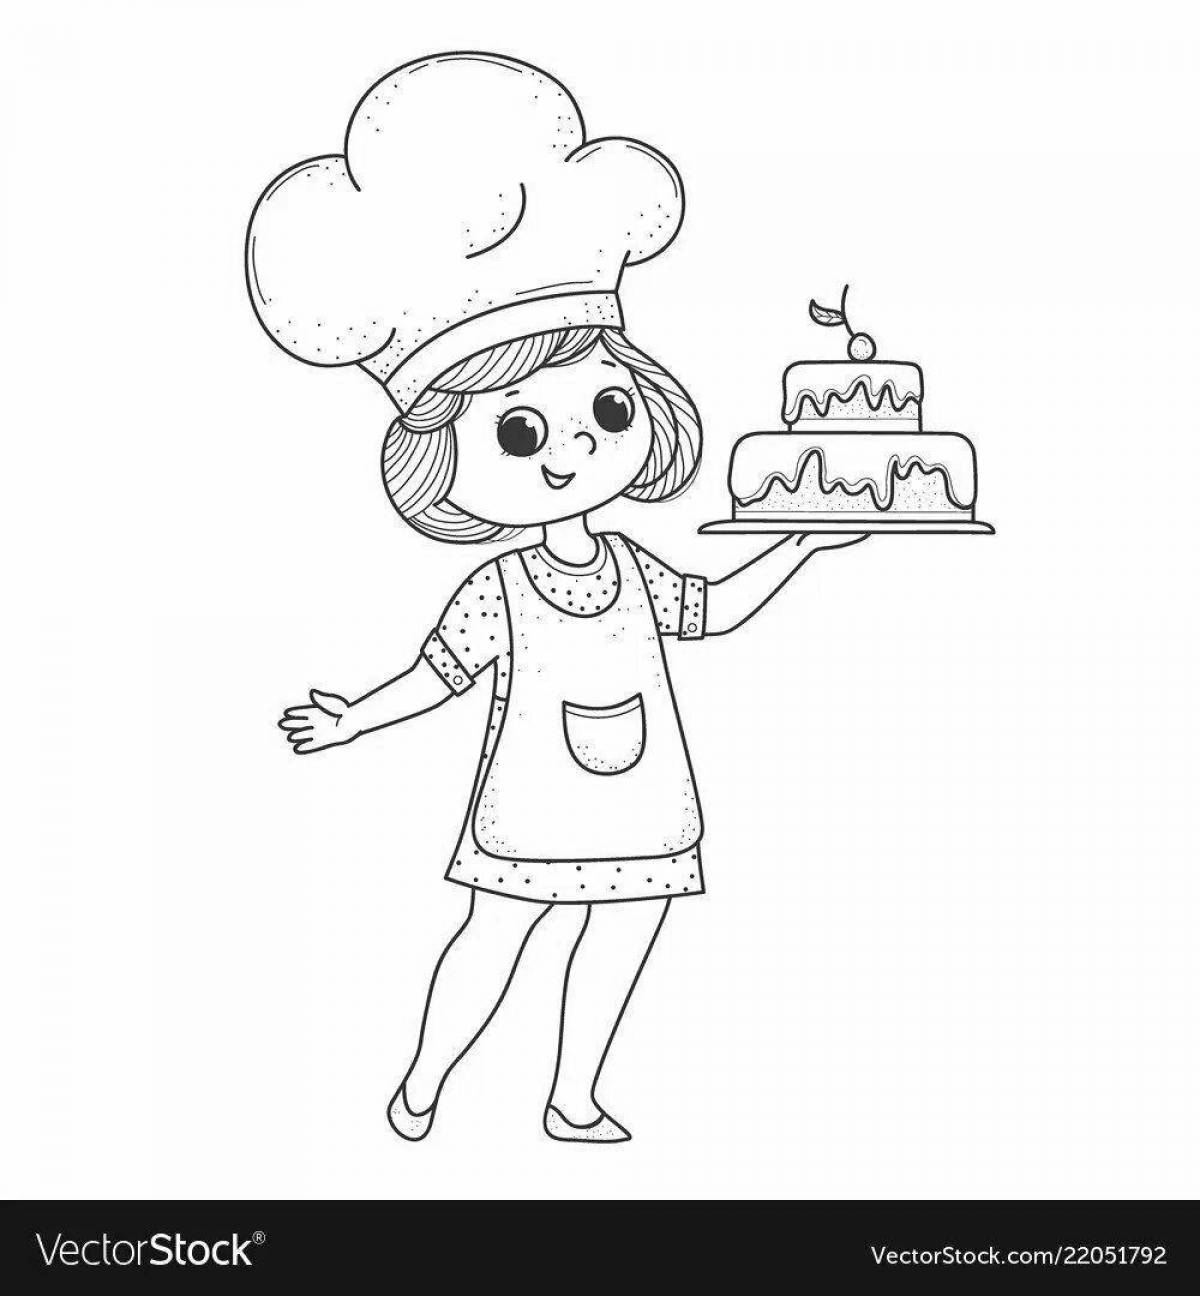 Colorful pastry chef coloring page